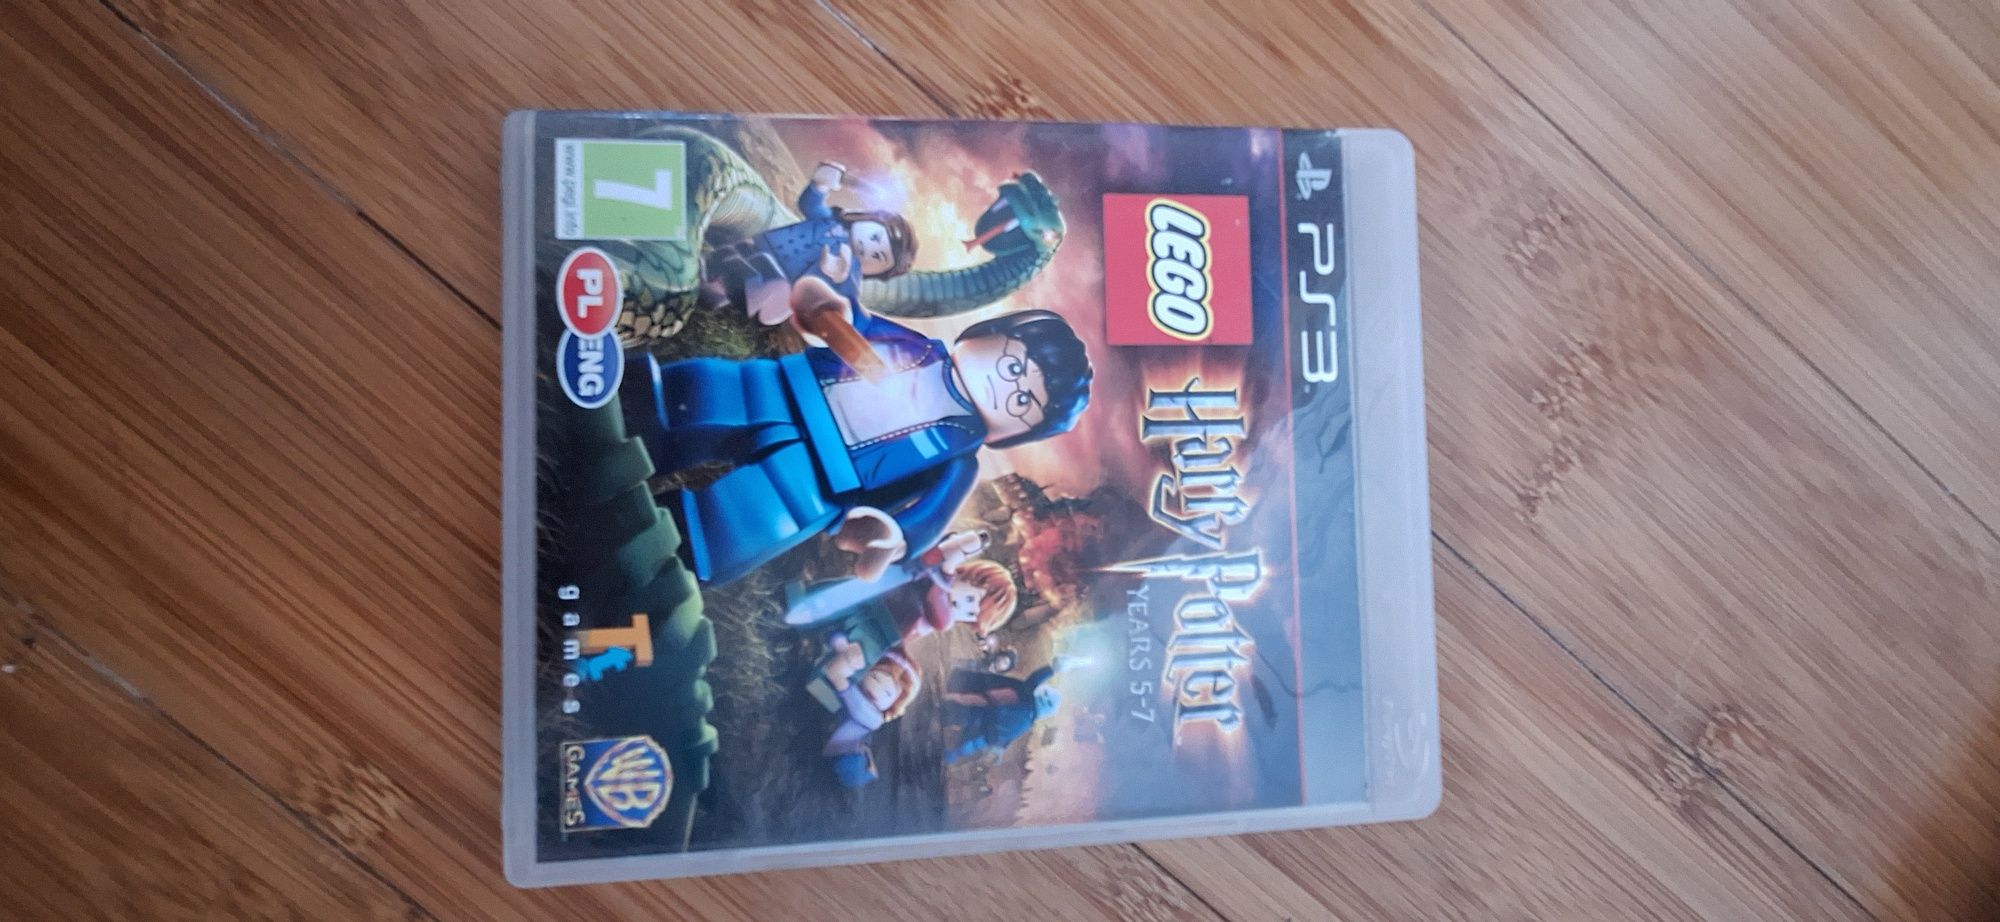 Harry Potter Years 5-7 LEGO PS3